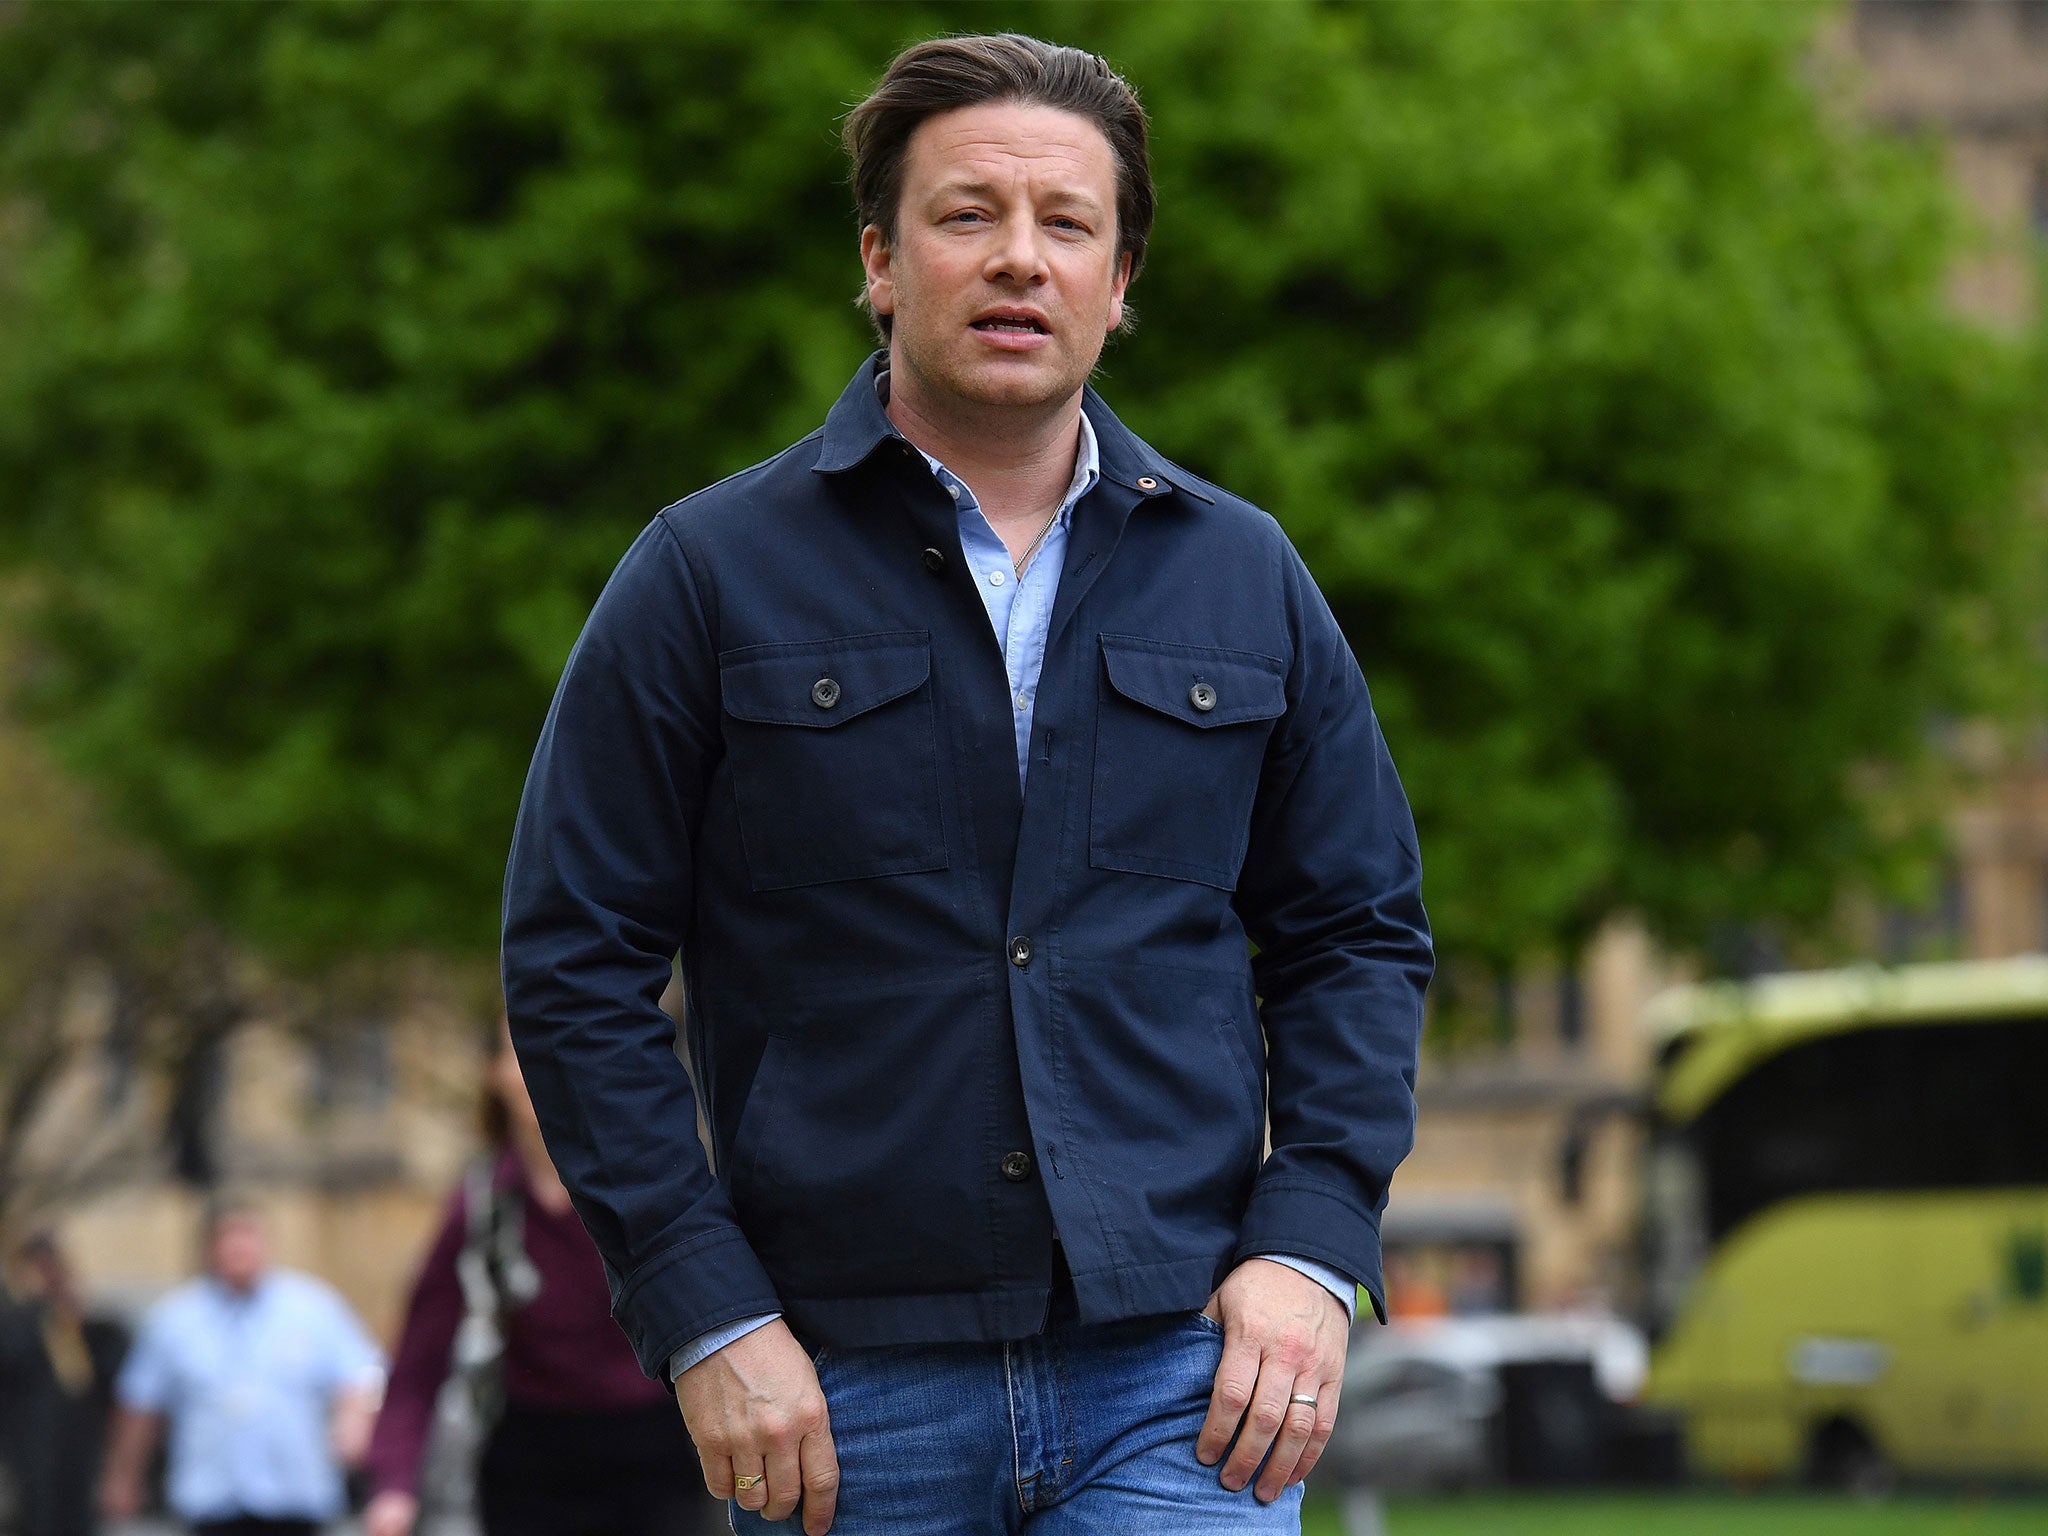 Oliver has five children with his wife, Jools Oliver, and the family was reportedly at home at the time of the incident